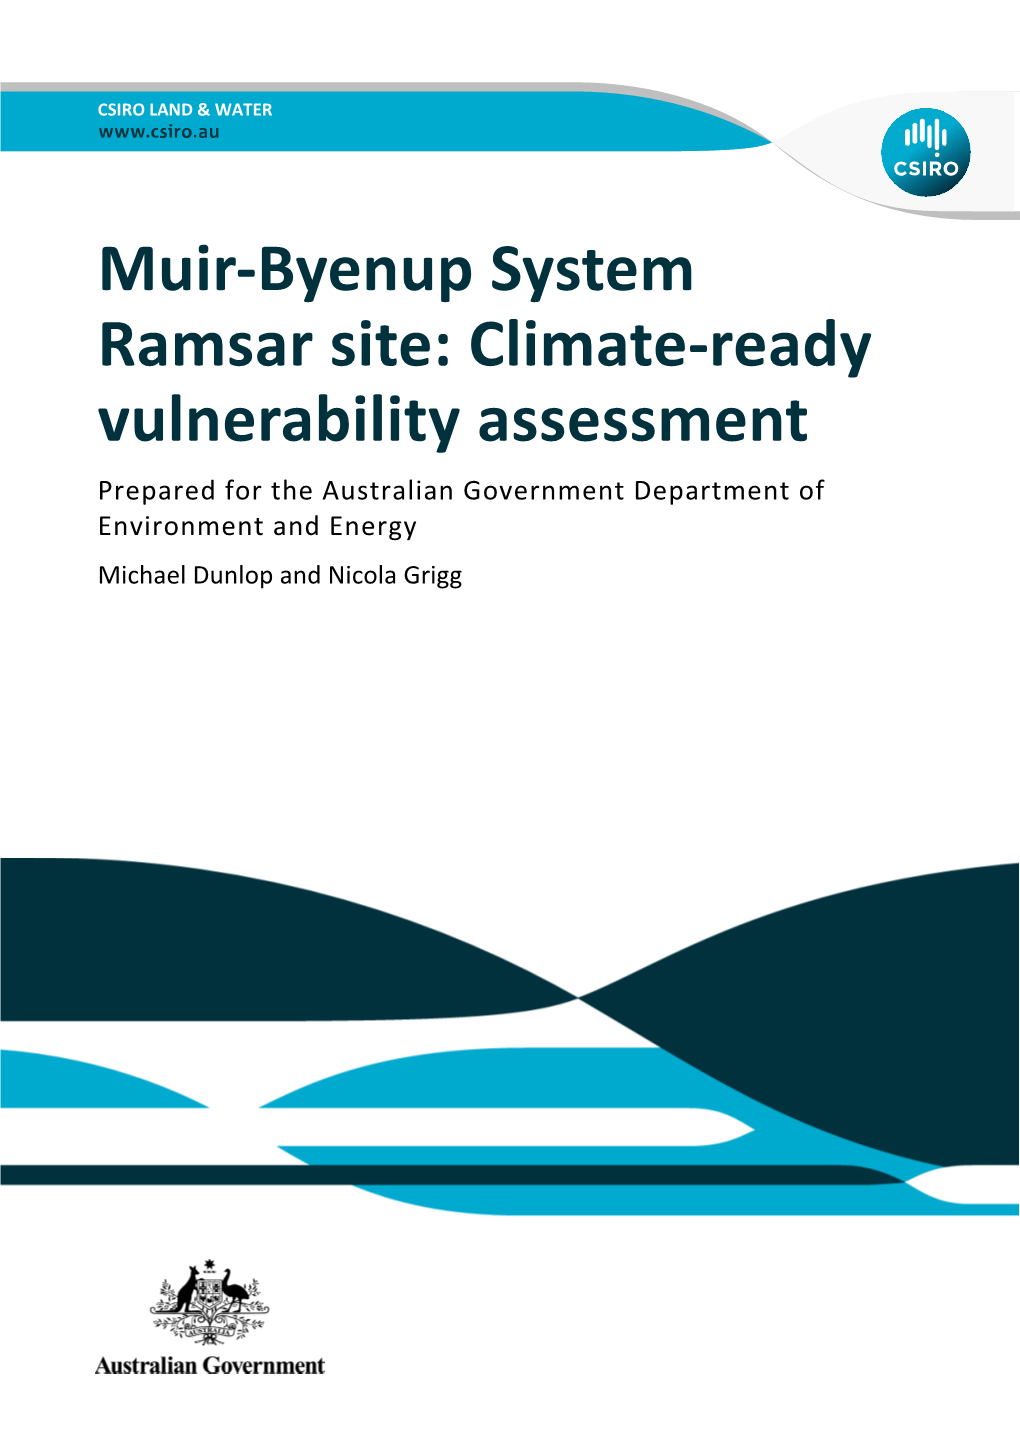 Muir-Byenup System Ramsar Site: Climate-Ready Vulnerability Assessment Prepared for the Australian Government Department of Environment and Energy